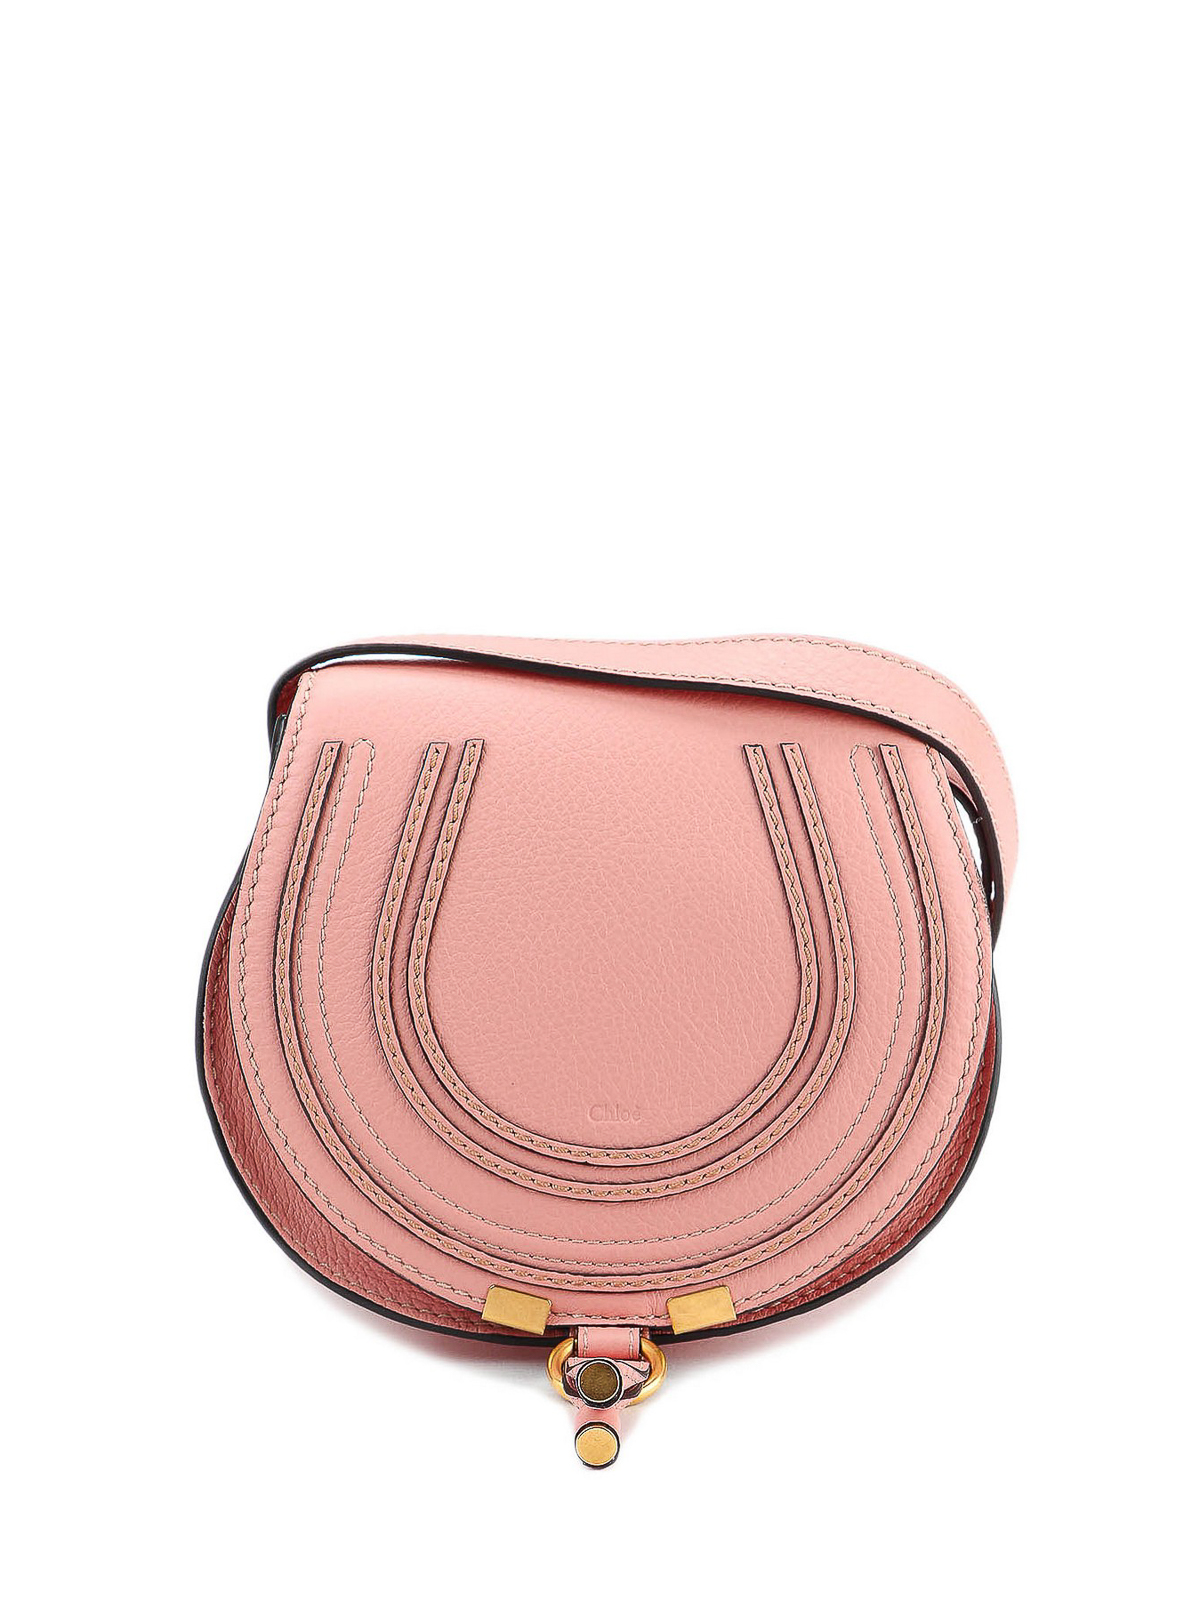  Marcie Small Pink Leather Bag